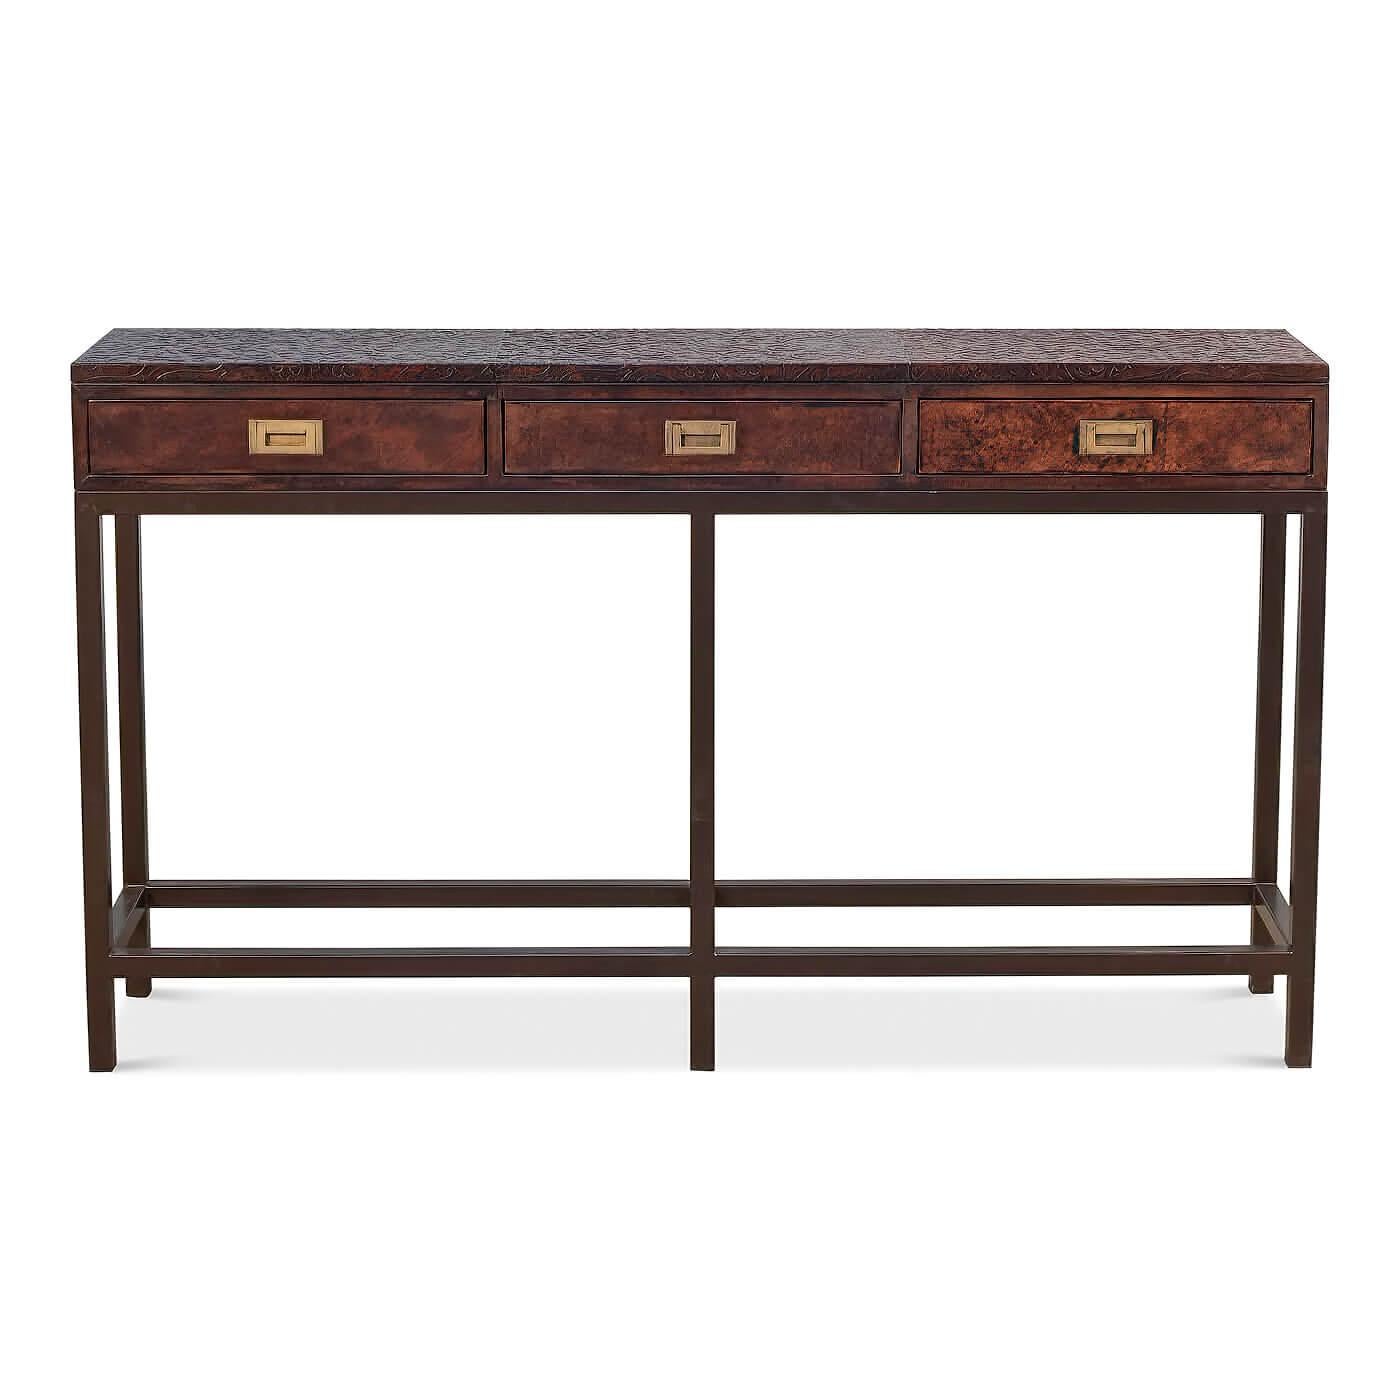 A modern campaign-style console table with an embossed leather top. This three-drawer console is accented with brass campaign-style hardware and sits on a metal base. 

Dimensions: 60